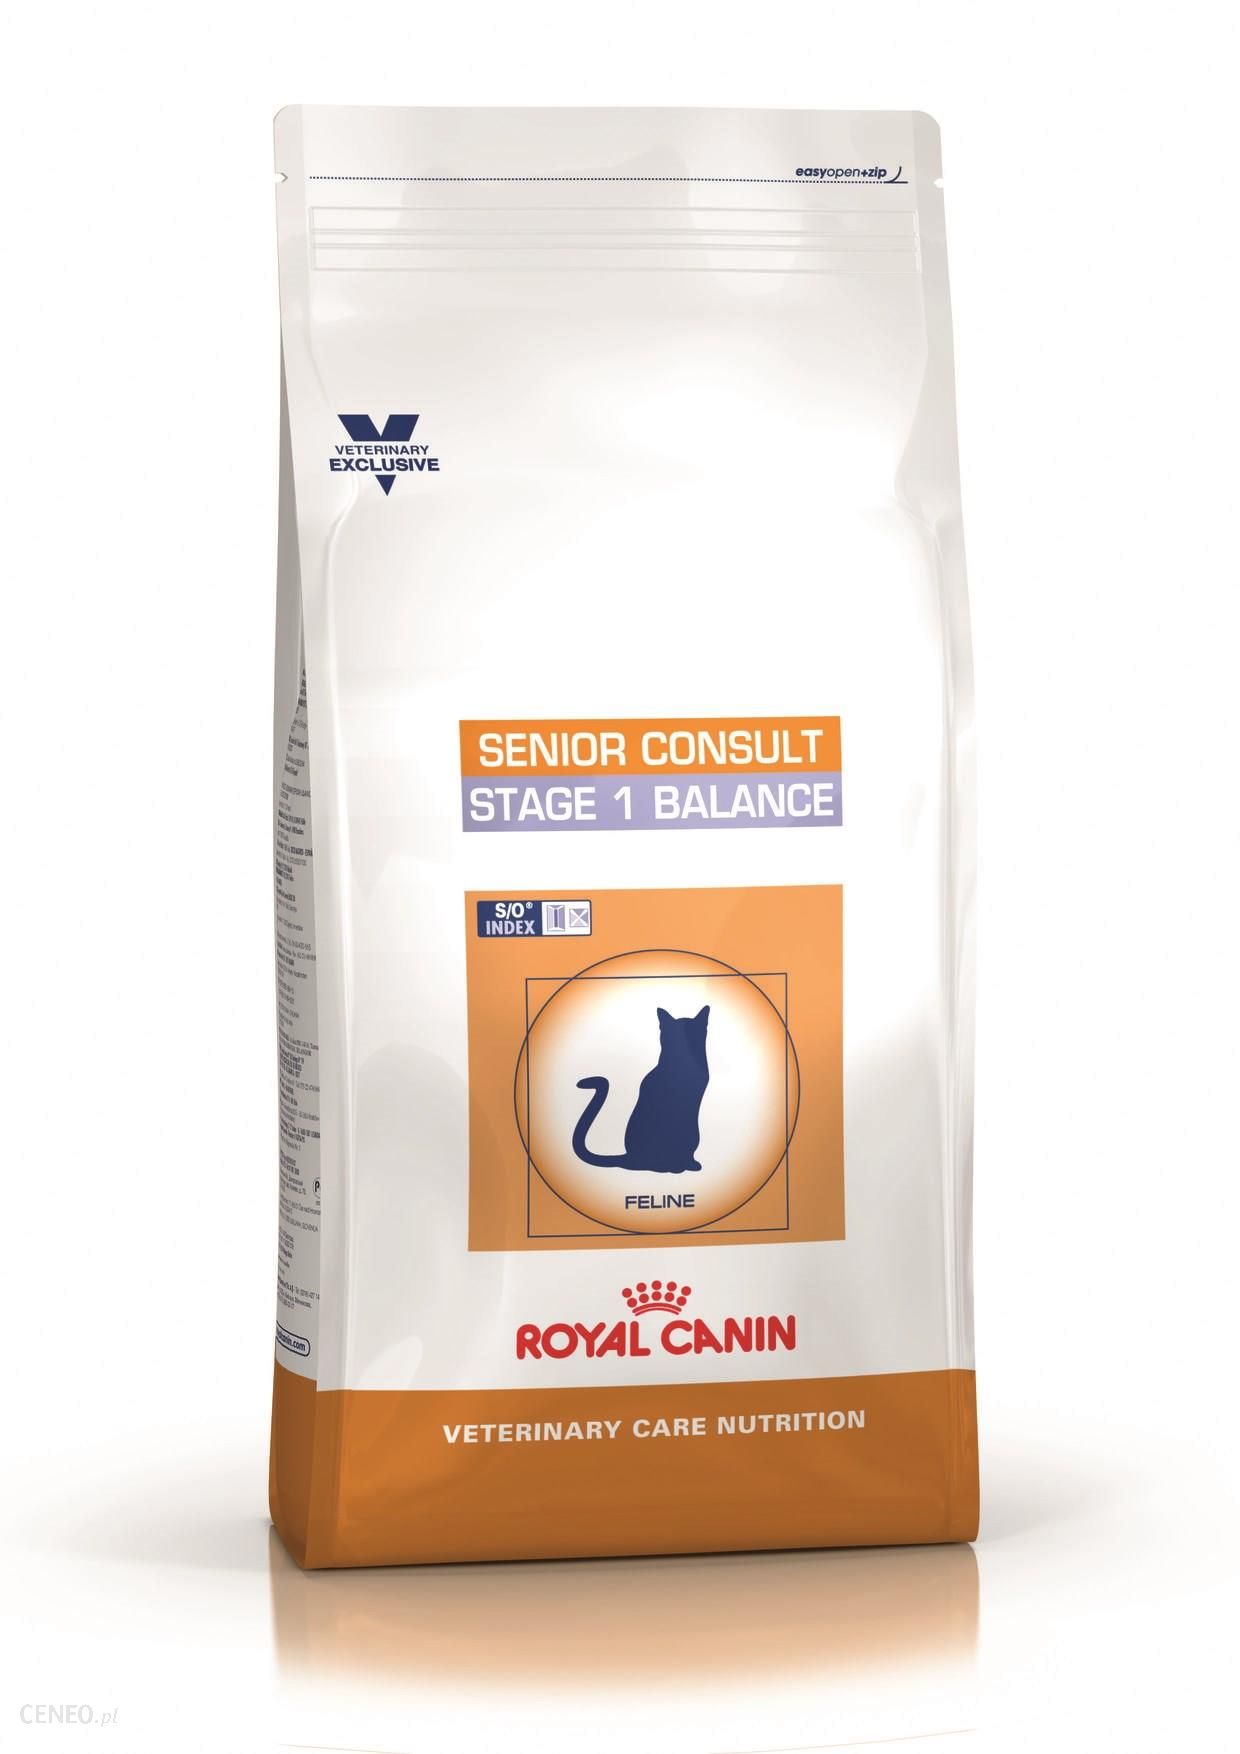 Royal Canin Veterinary Care Nutrition Senior Consult Stage 1 Balance 1